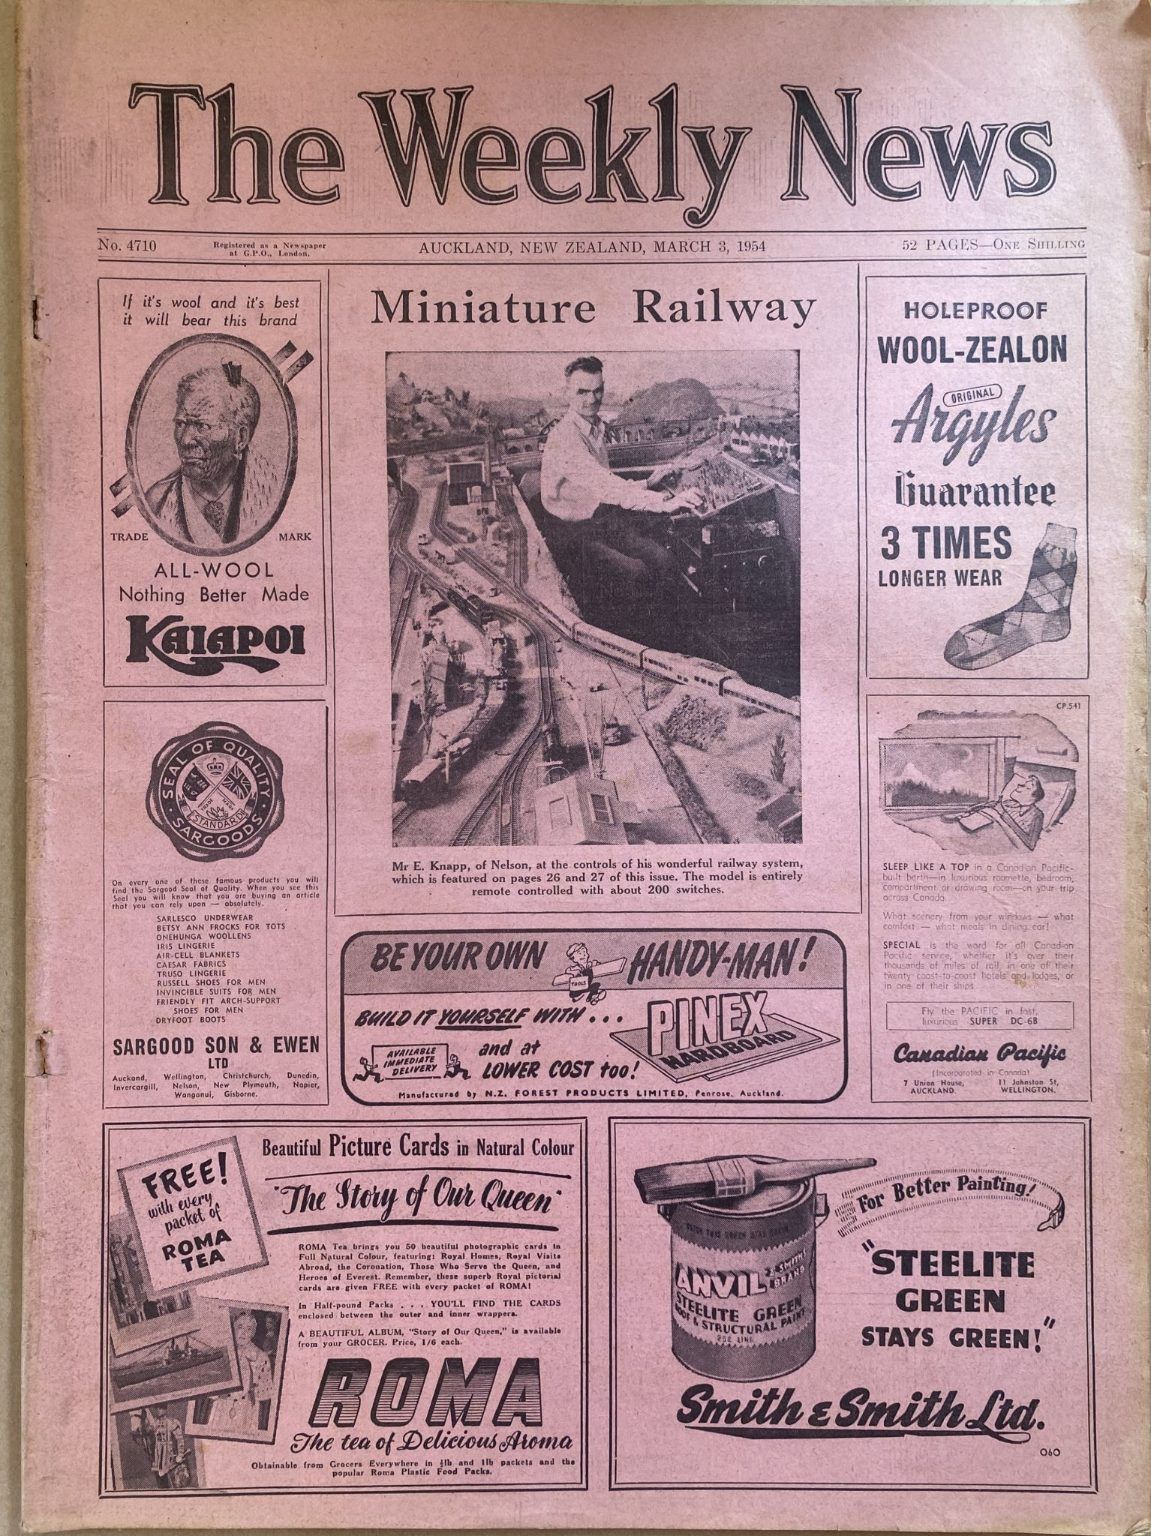 OLD NEWSPAPER: The Weekly News - No. 4710, 3 March 1954